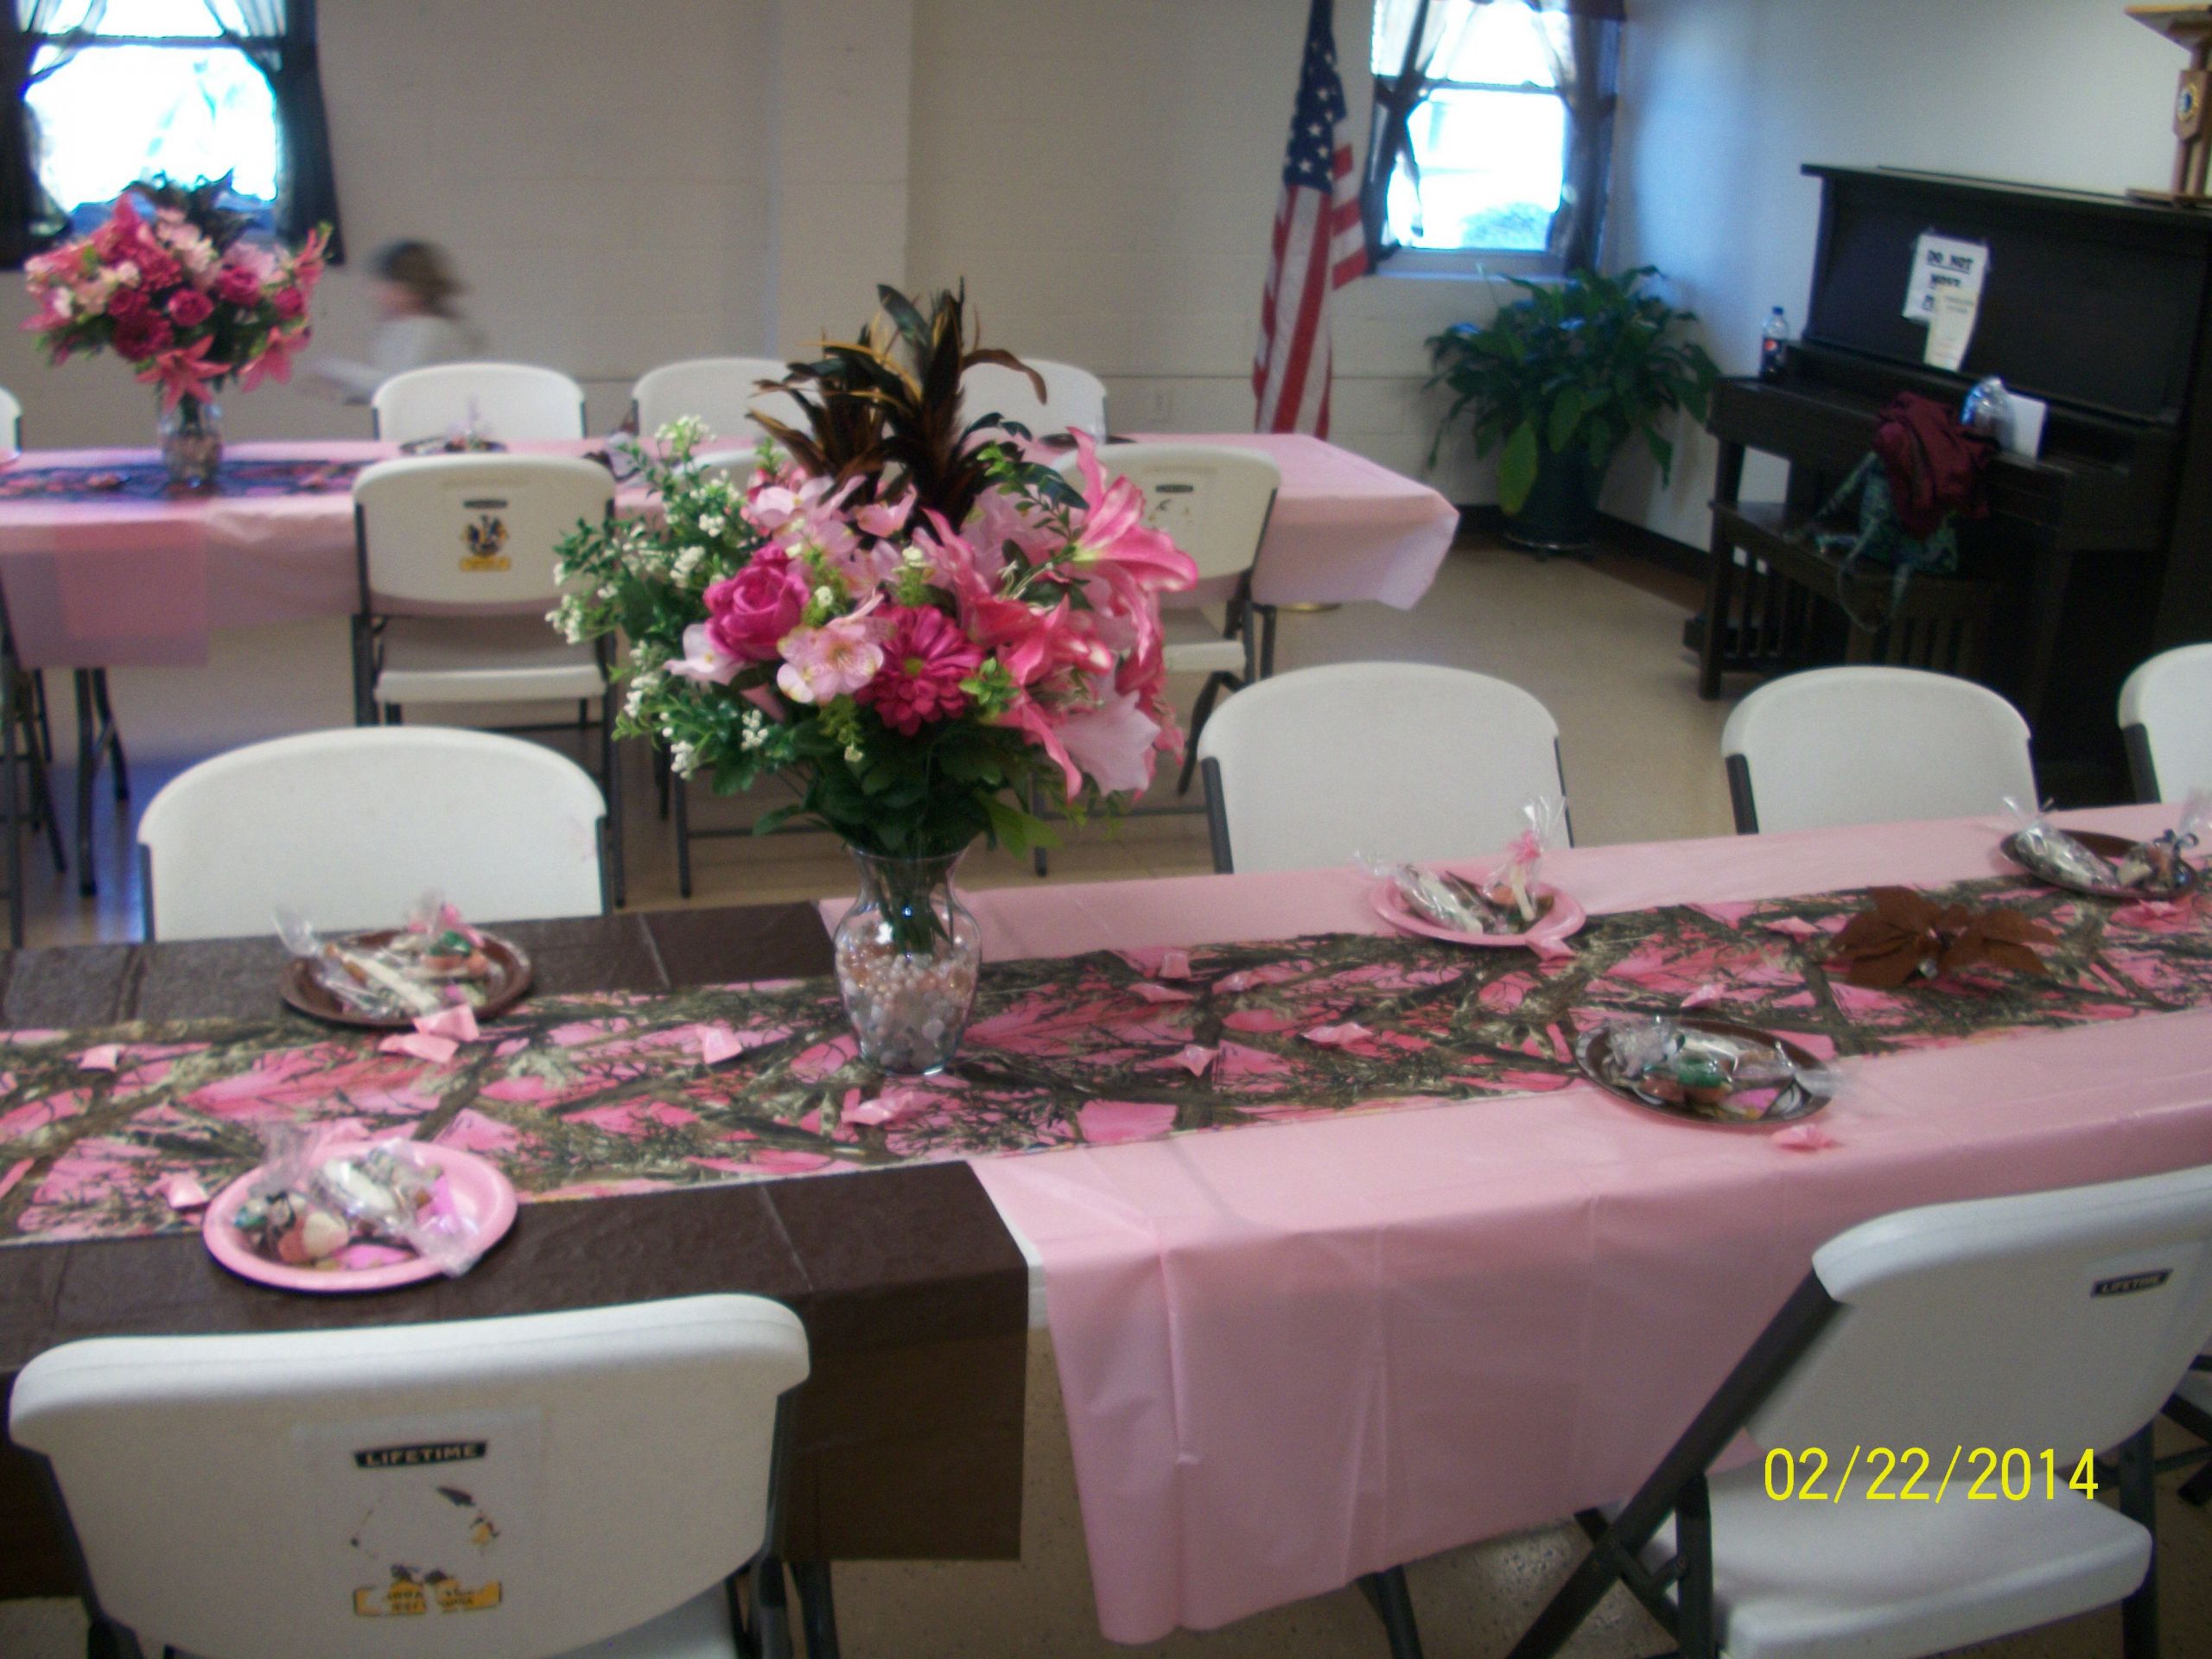 Camouflage Baby Shower Decorating Ideas
 Pink camo baby shower 2 22 14